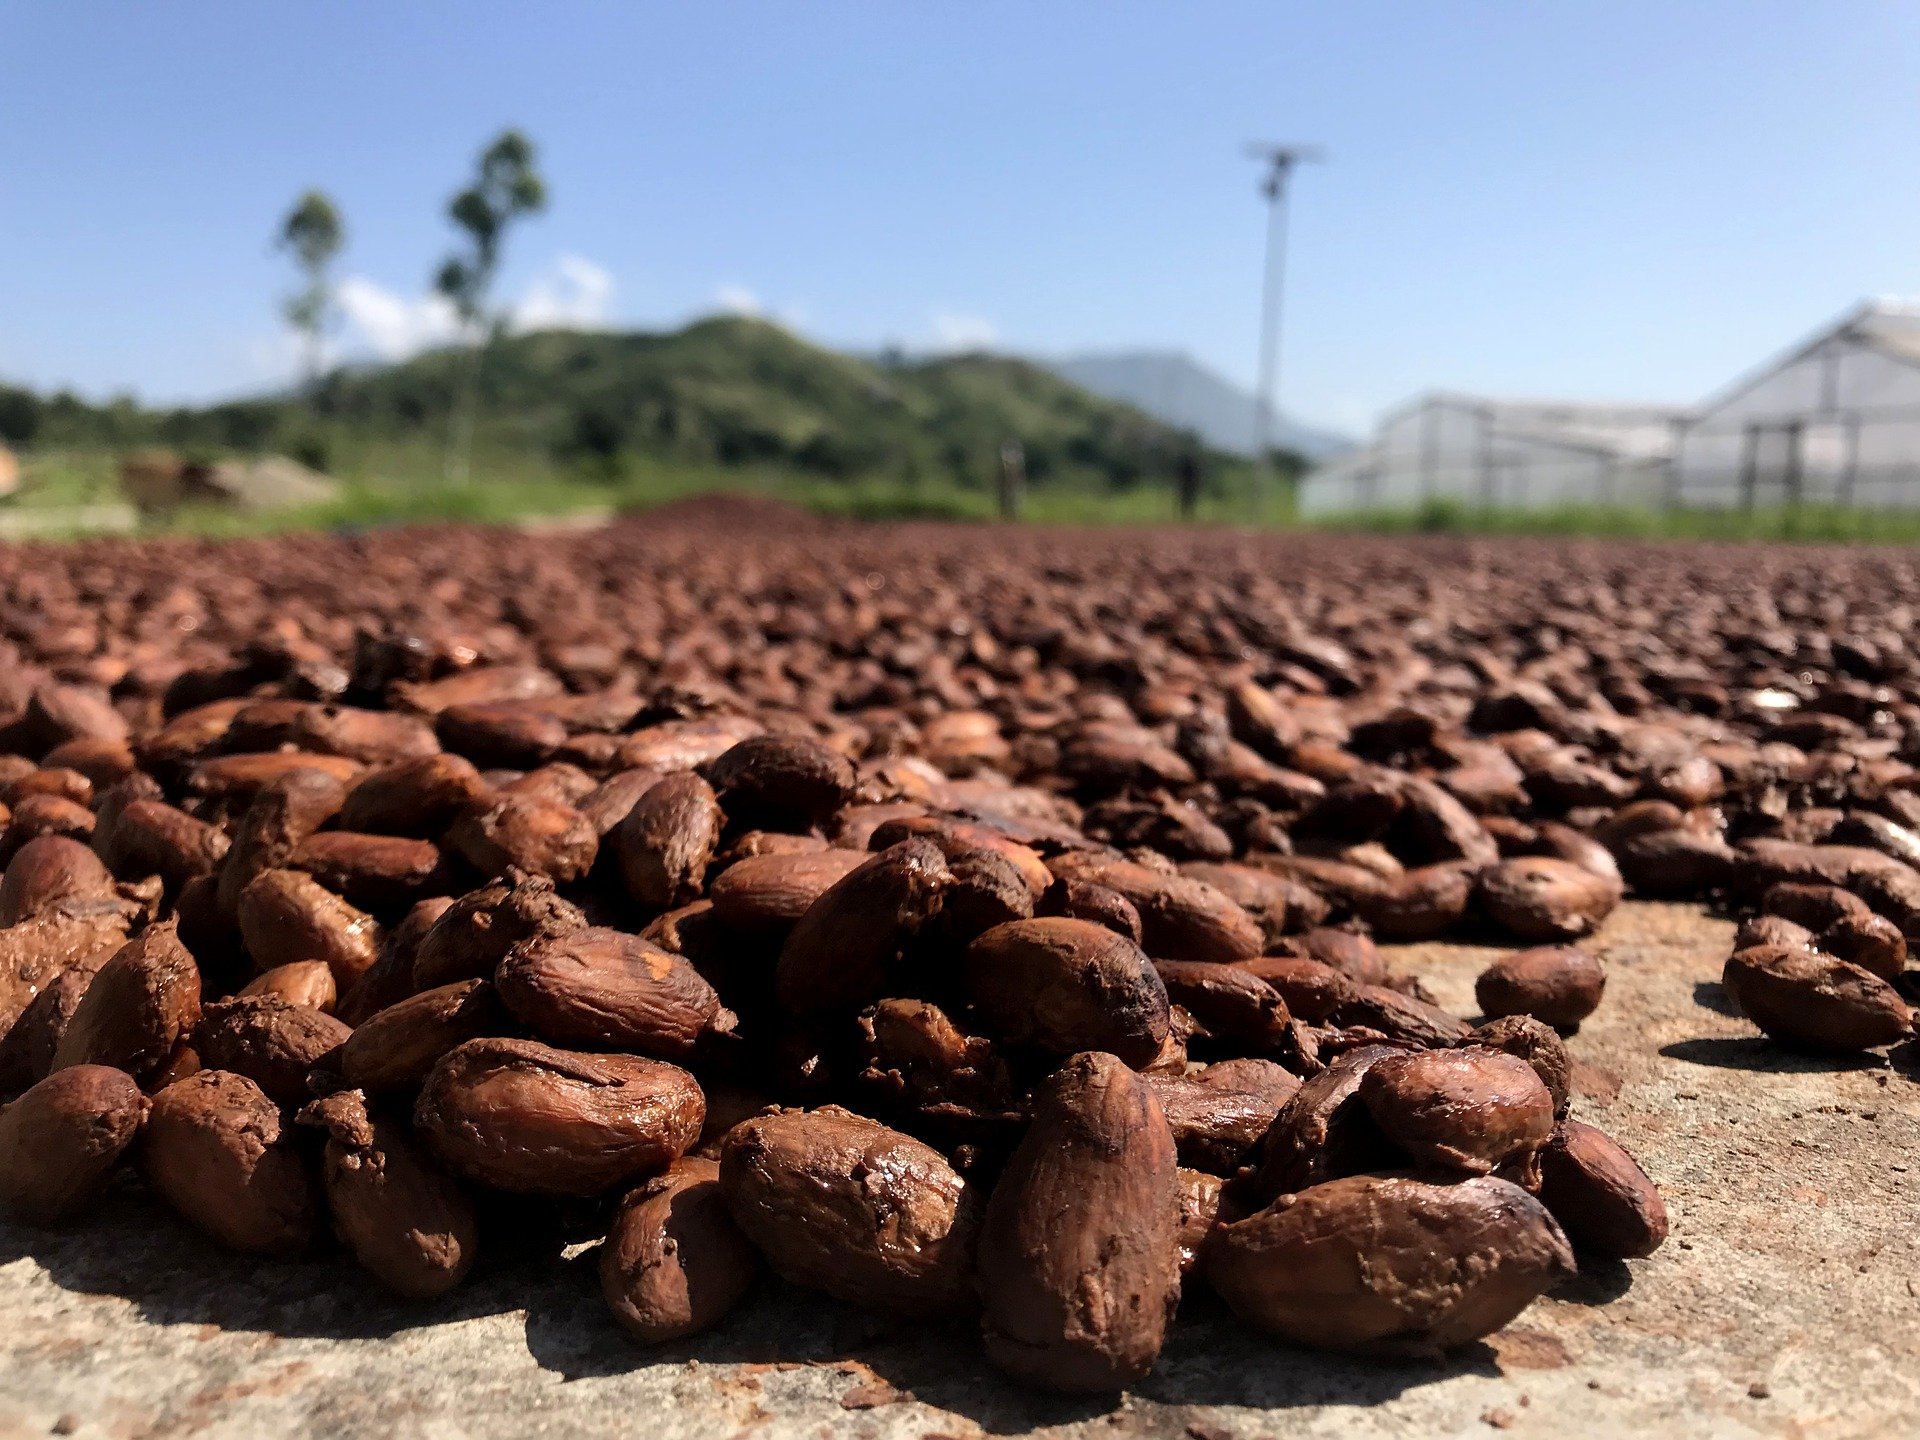 Mondelēz and Olam team up to create world’s largest sustainable cocoa farm